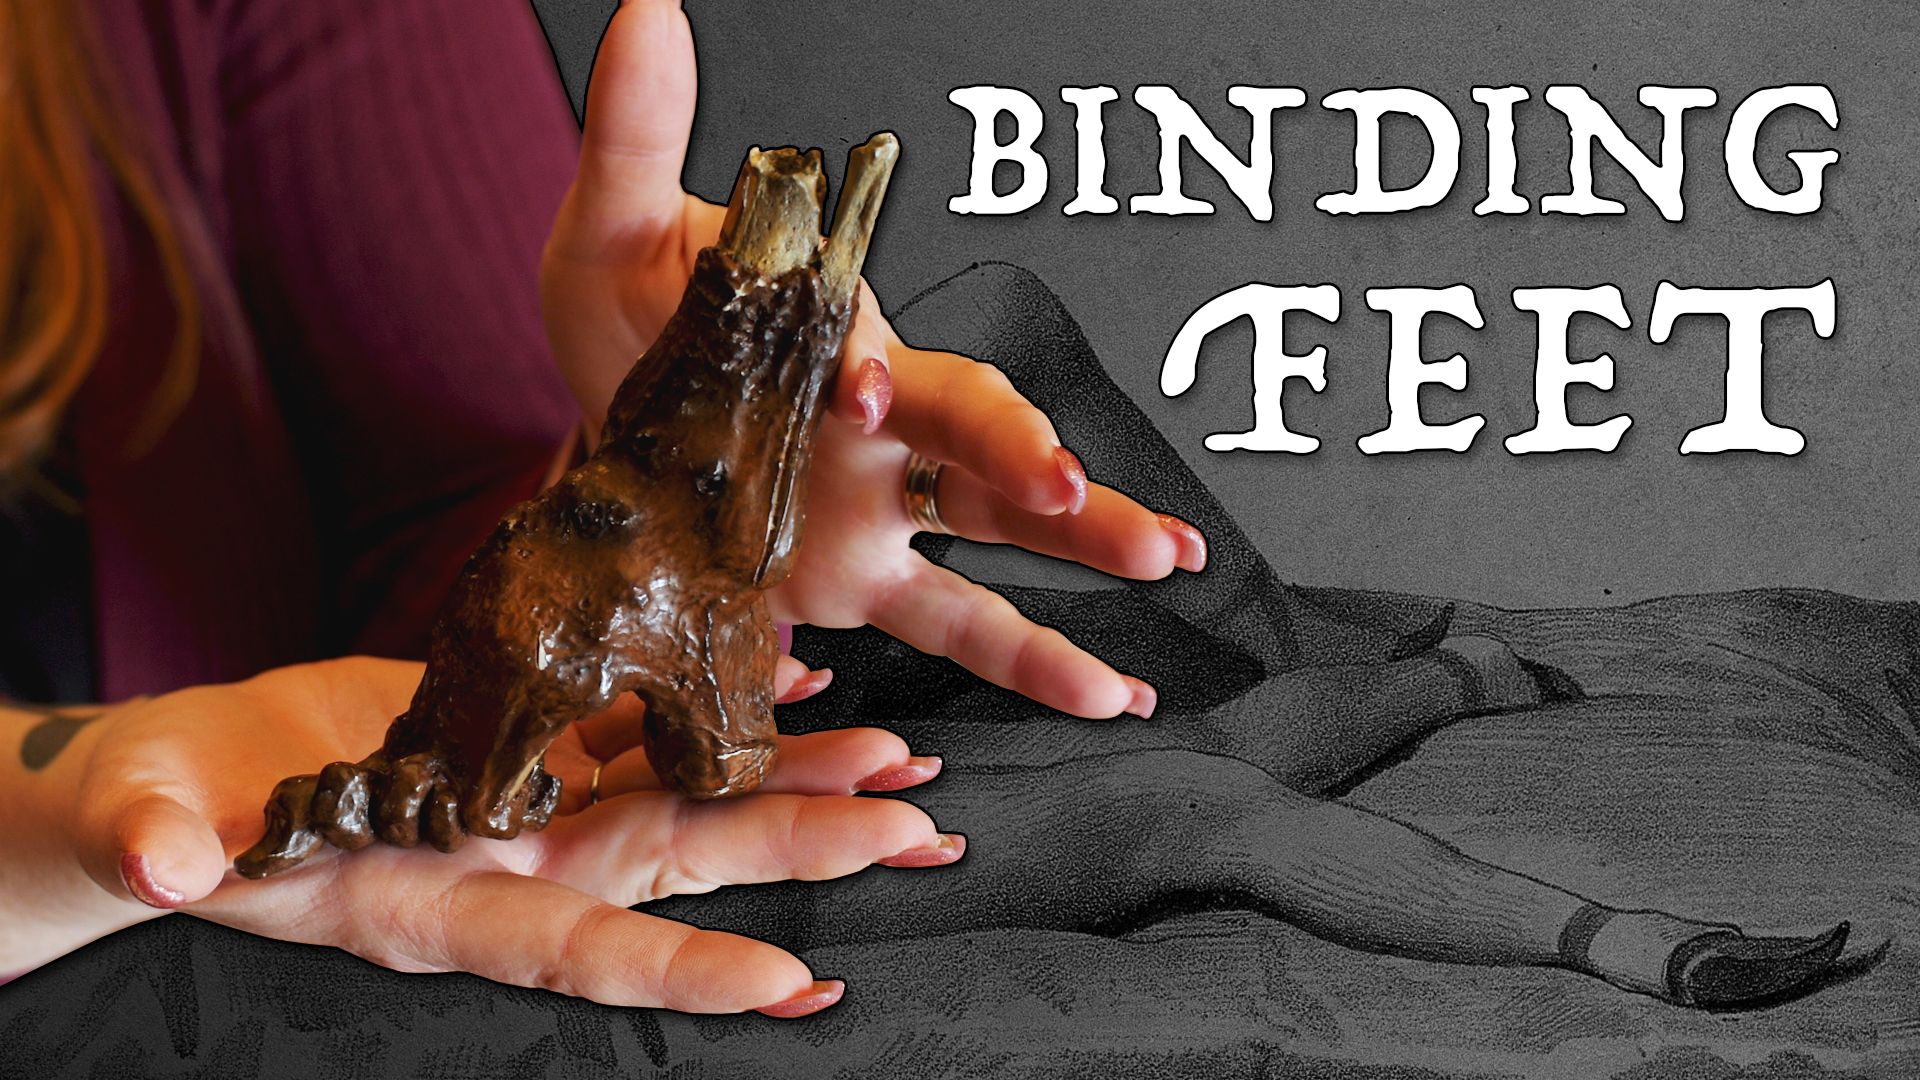 Title text 'binding feet" and hands holding the bones of a bound foot